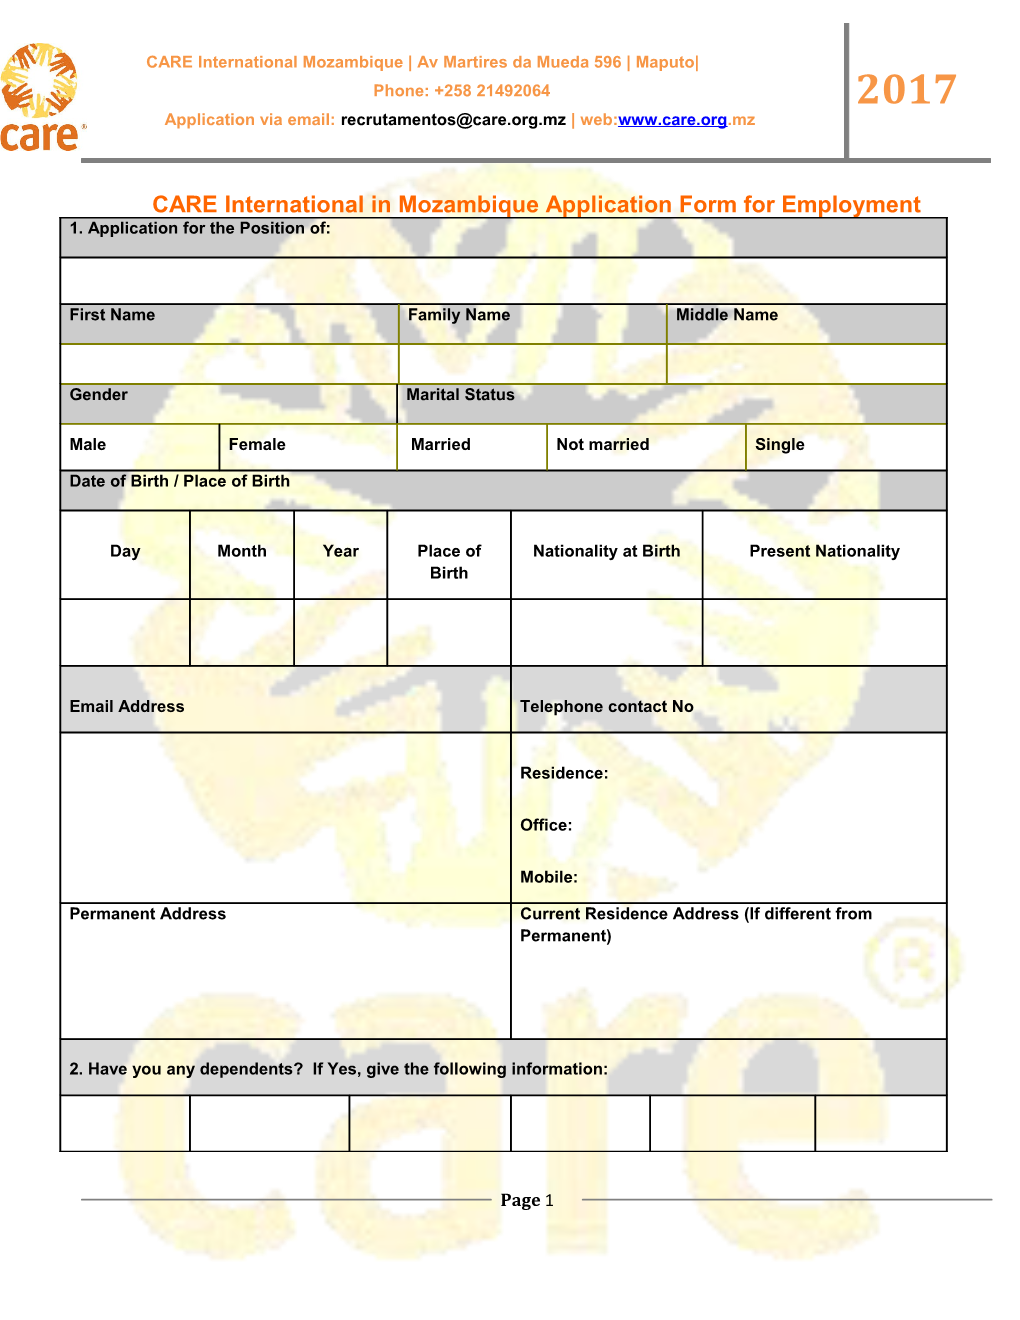 CARE International in Mozambique Application Form for Employment